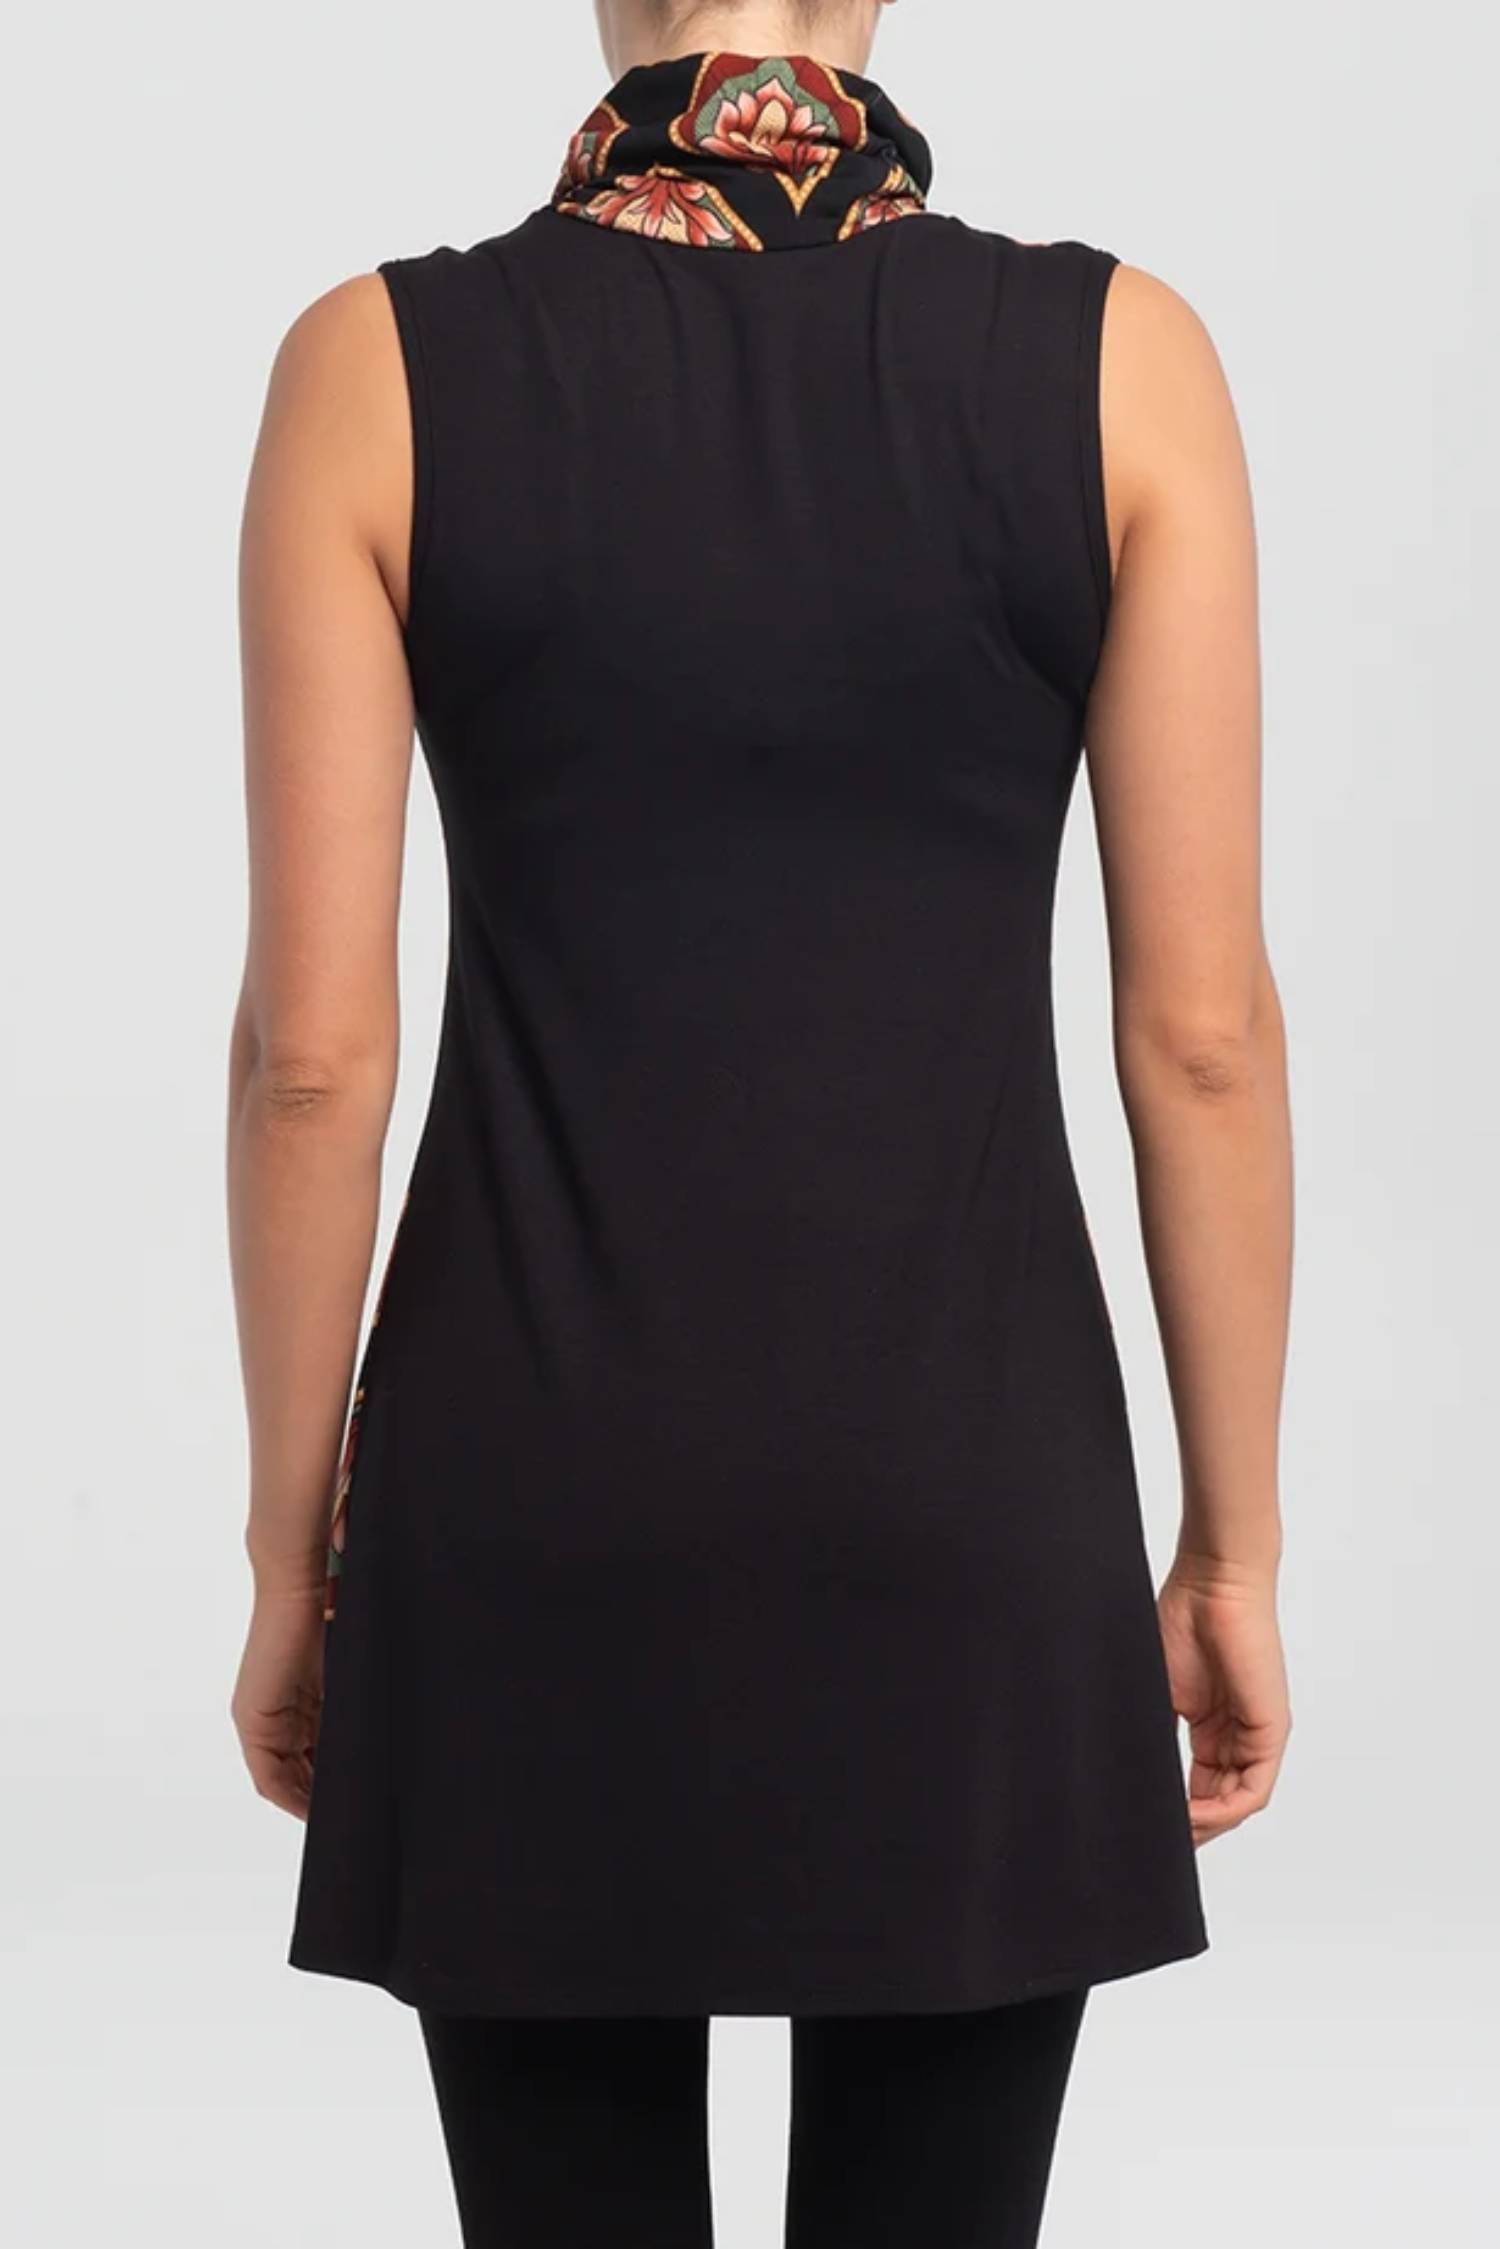 Svetlana Tunic by Kollontai, back view, Black, turtleneck, sleeveless, A-line, print front and solid black, sizes XS to XXL, made in Montreal